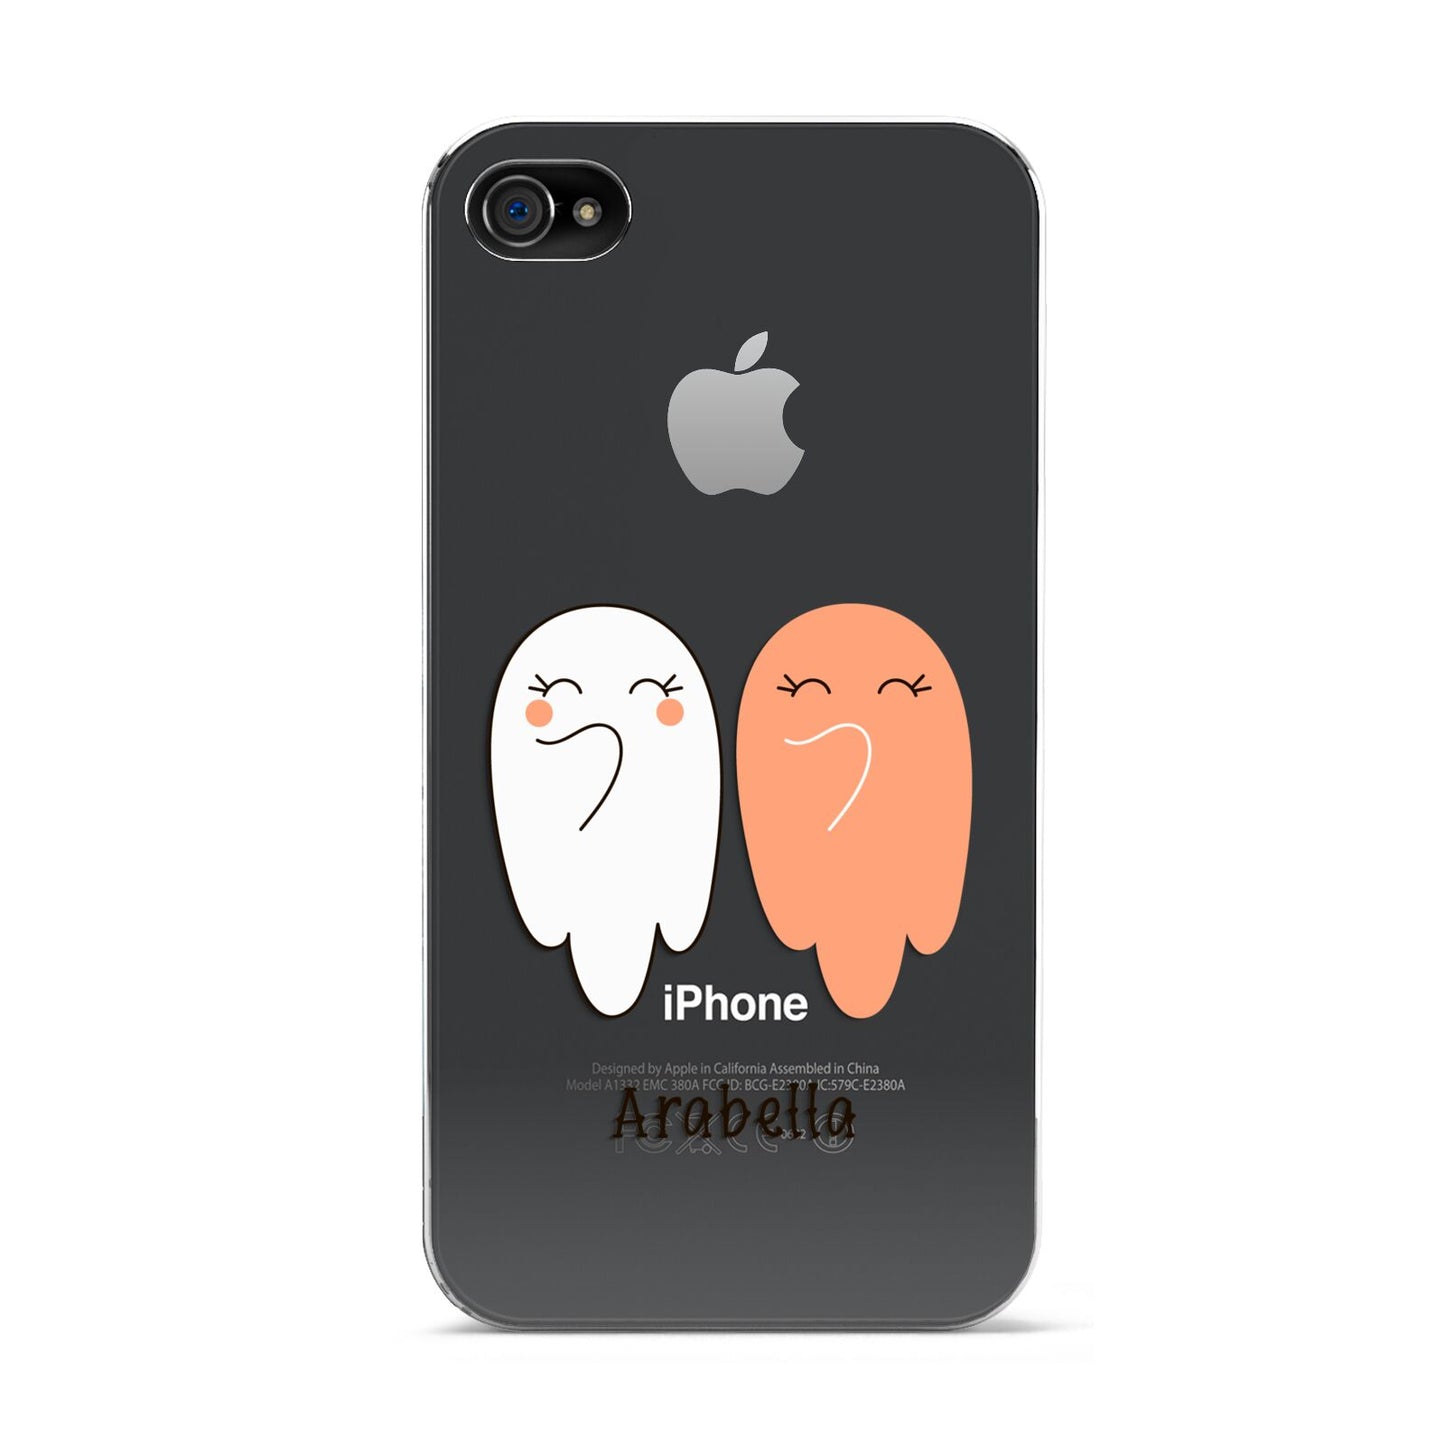 Two Ghosts Apple iPhone 4s Case